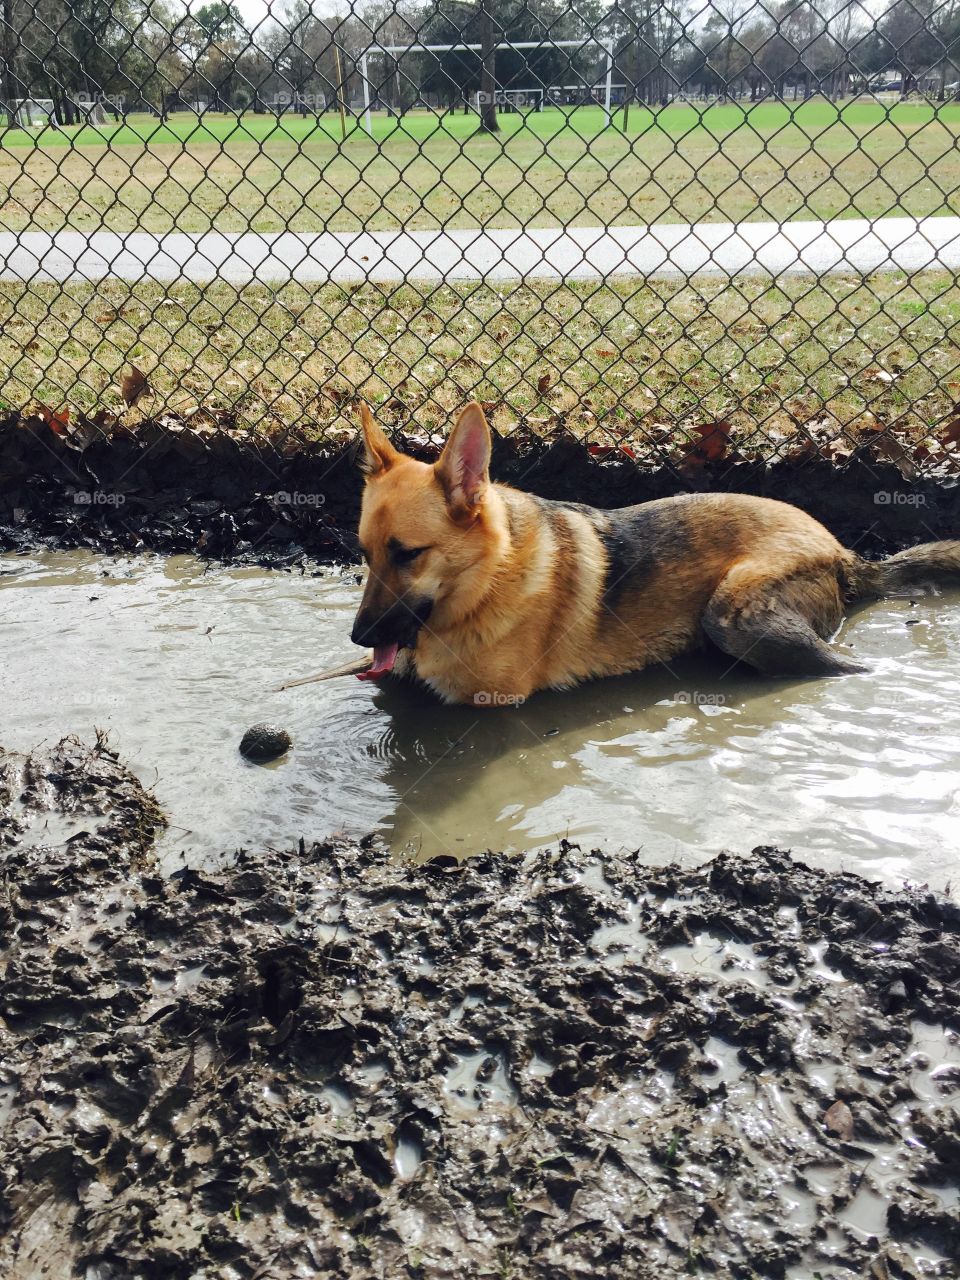 She likes bathing her toys in mud. 